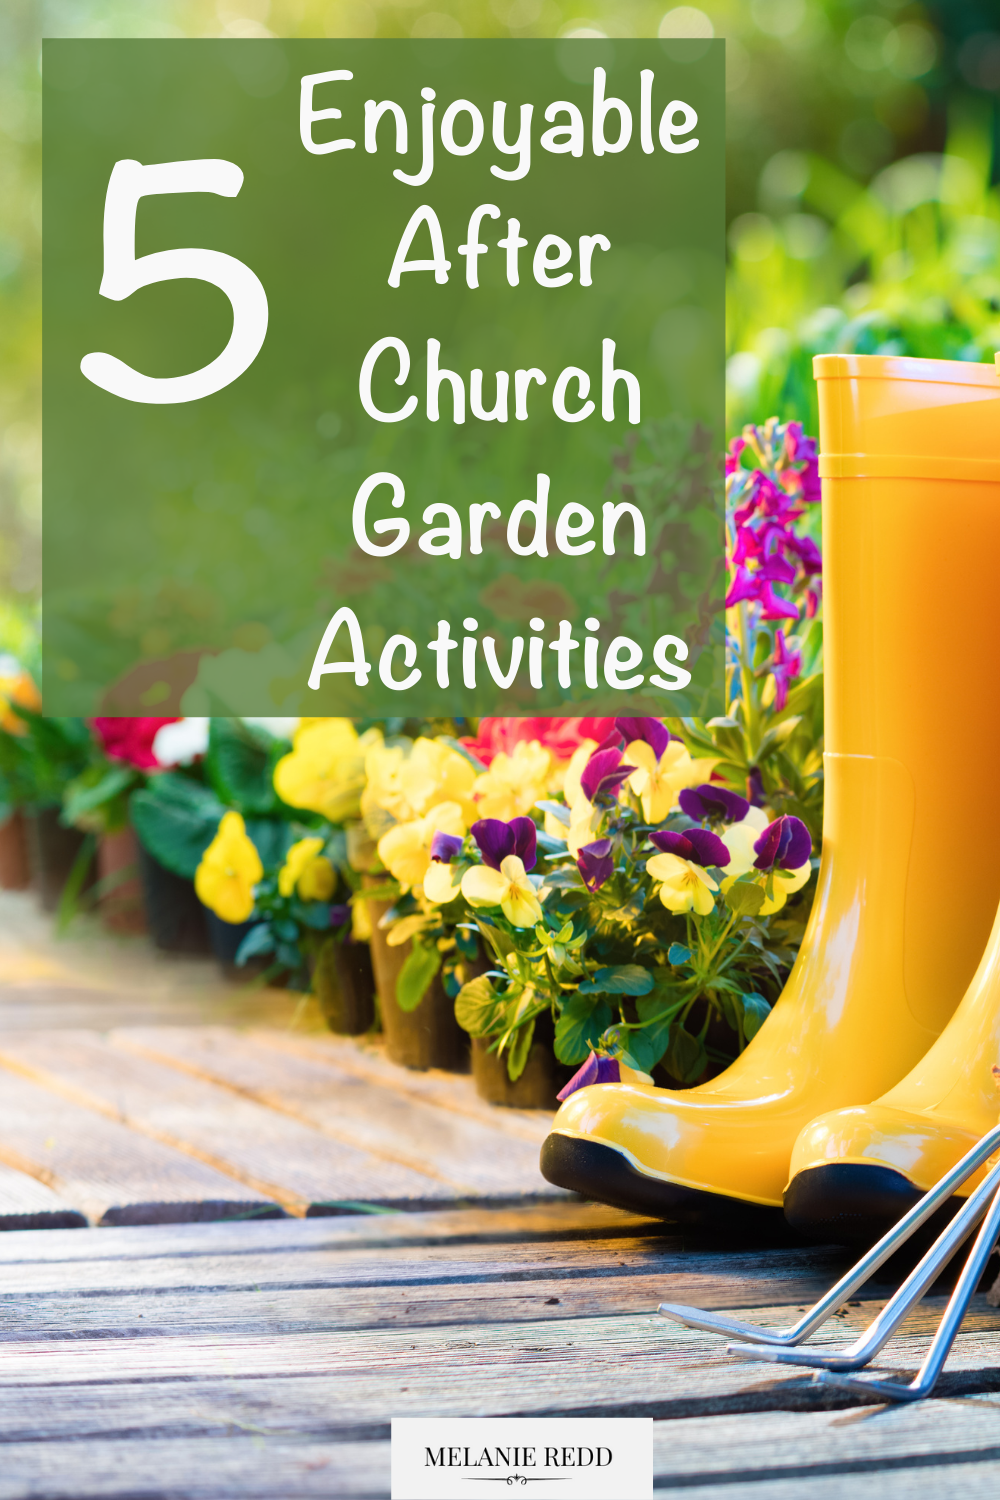 Do you ever find yourself wondering how to fill the afternoon with your family? Here are 5 enjoyable after church garden activities.